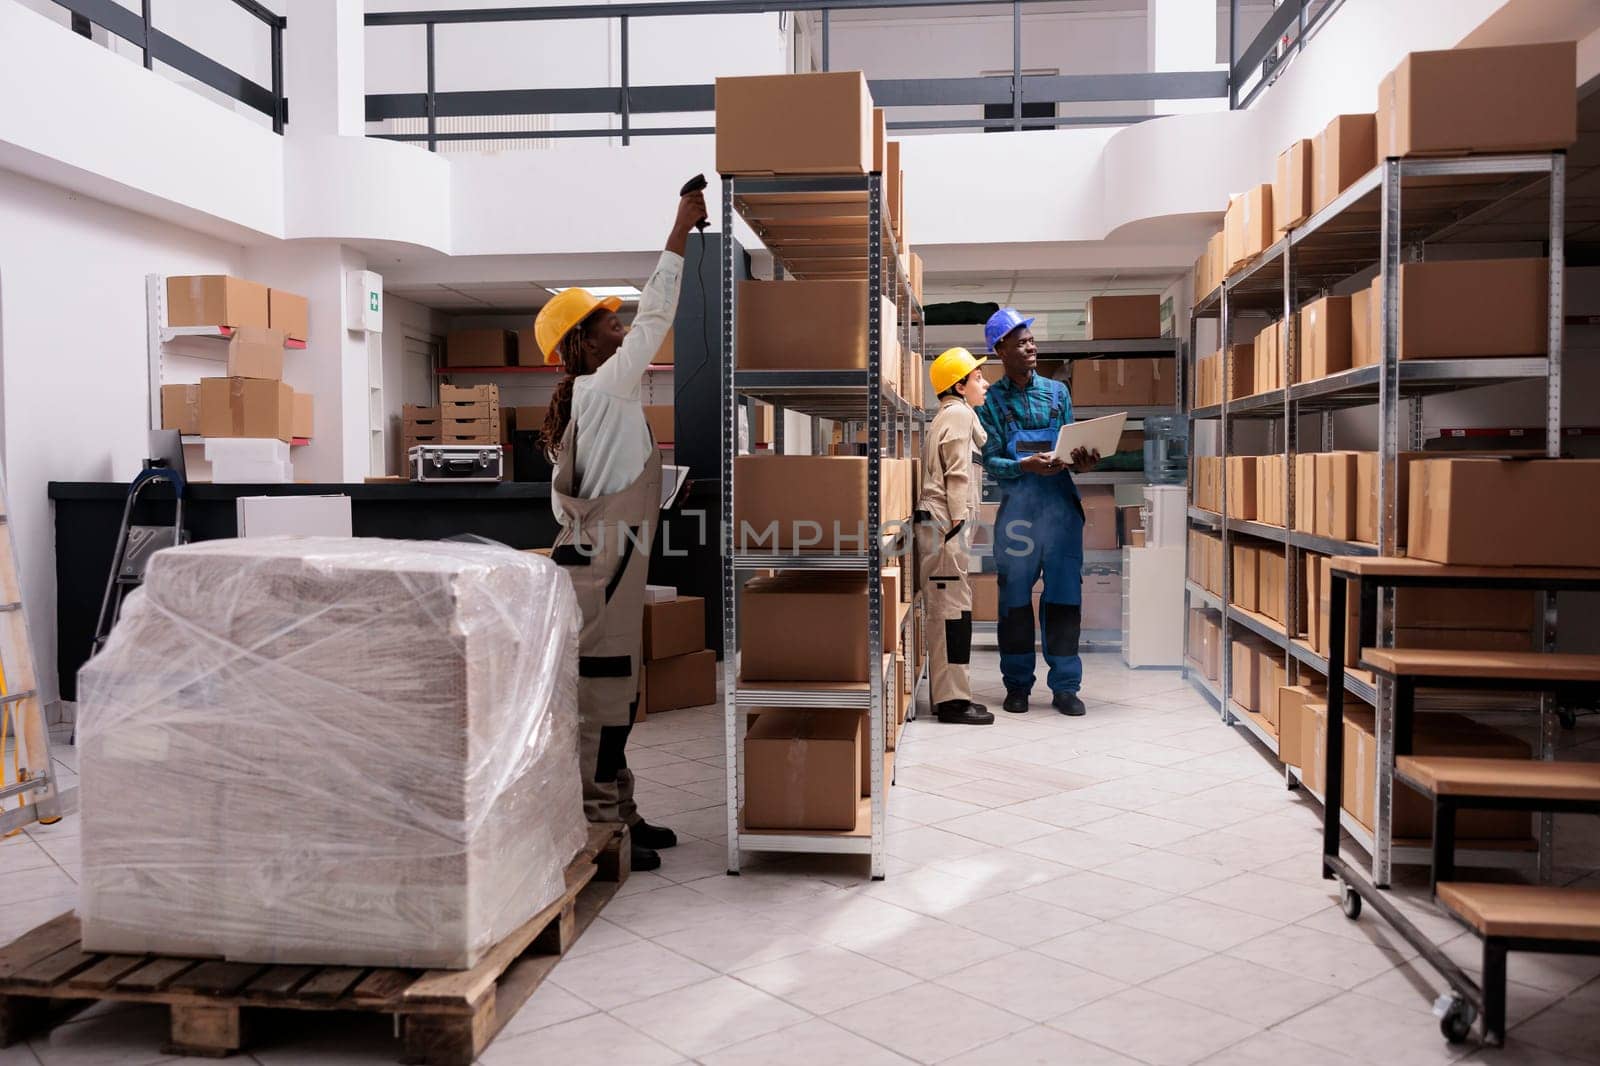 Industrial storehouse employees scanning cardboard boxes barcodes and checking stock supply on laptop. Diverse warehouse coworkers standing near parcels shelves and working